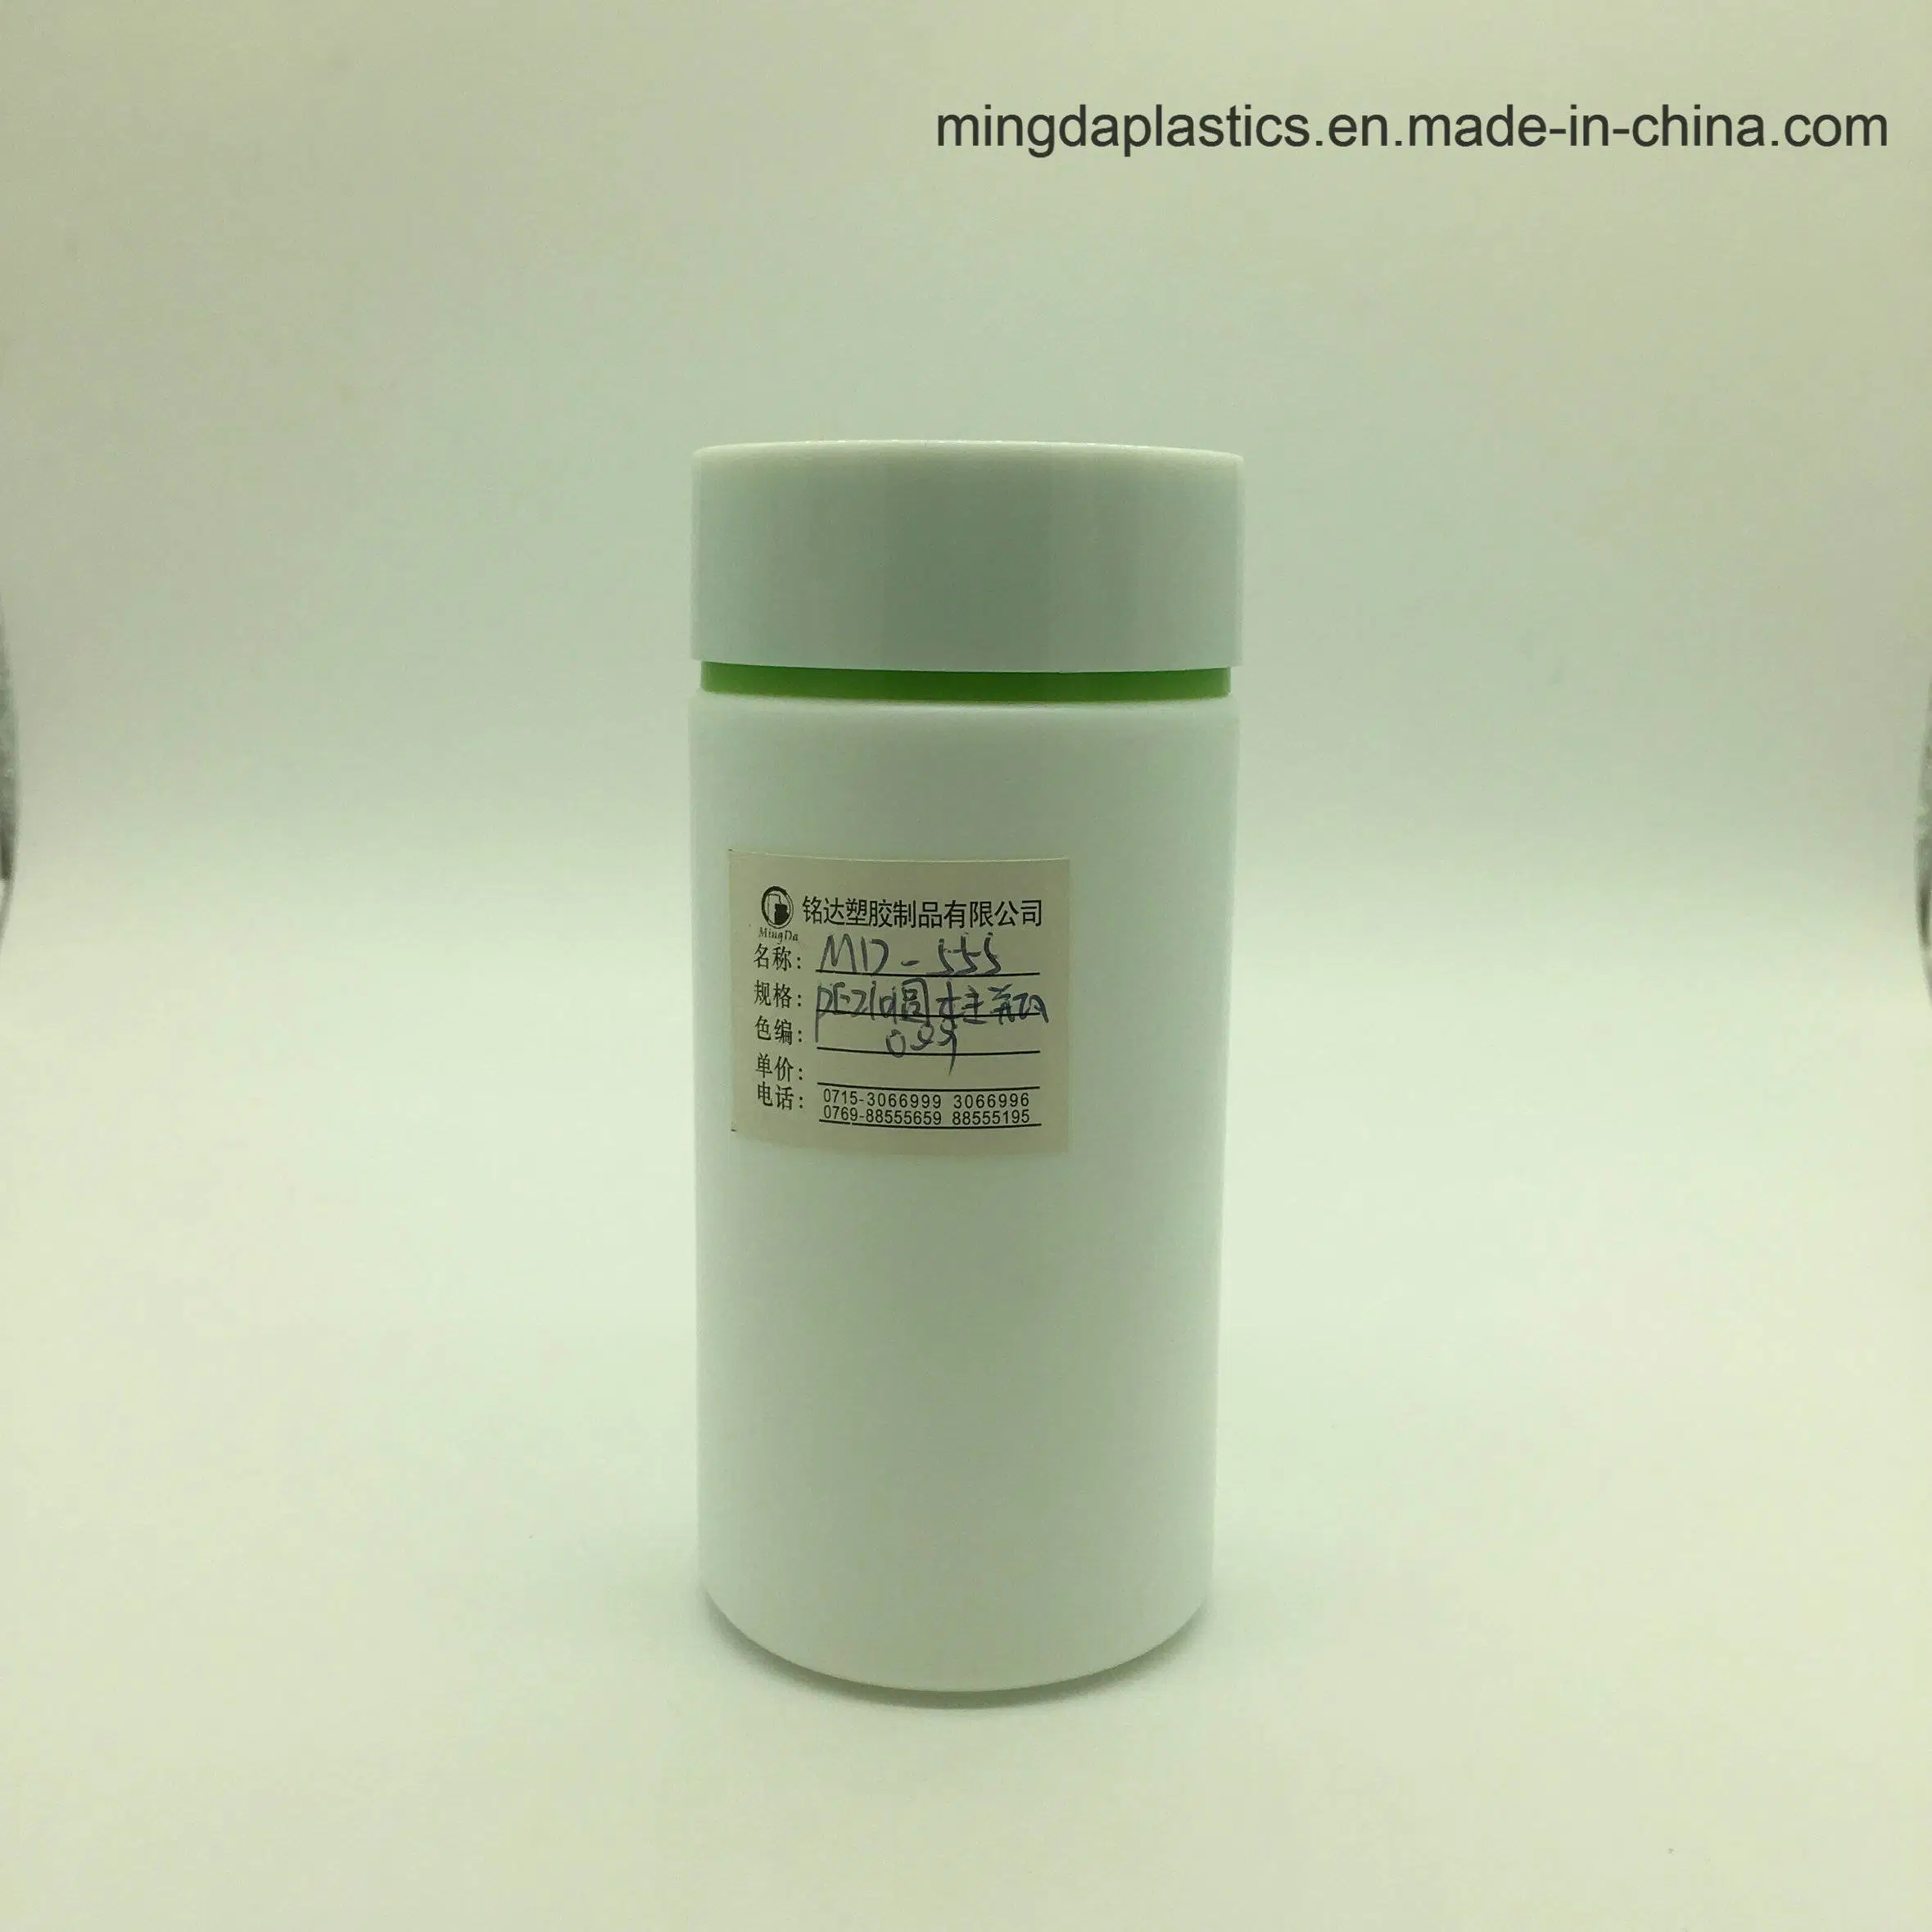 Cylinder-Shaped Bottle Pet/HDPE Plastic Bottle Cap Pill Tablet Health Care Products Container/Jar